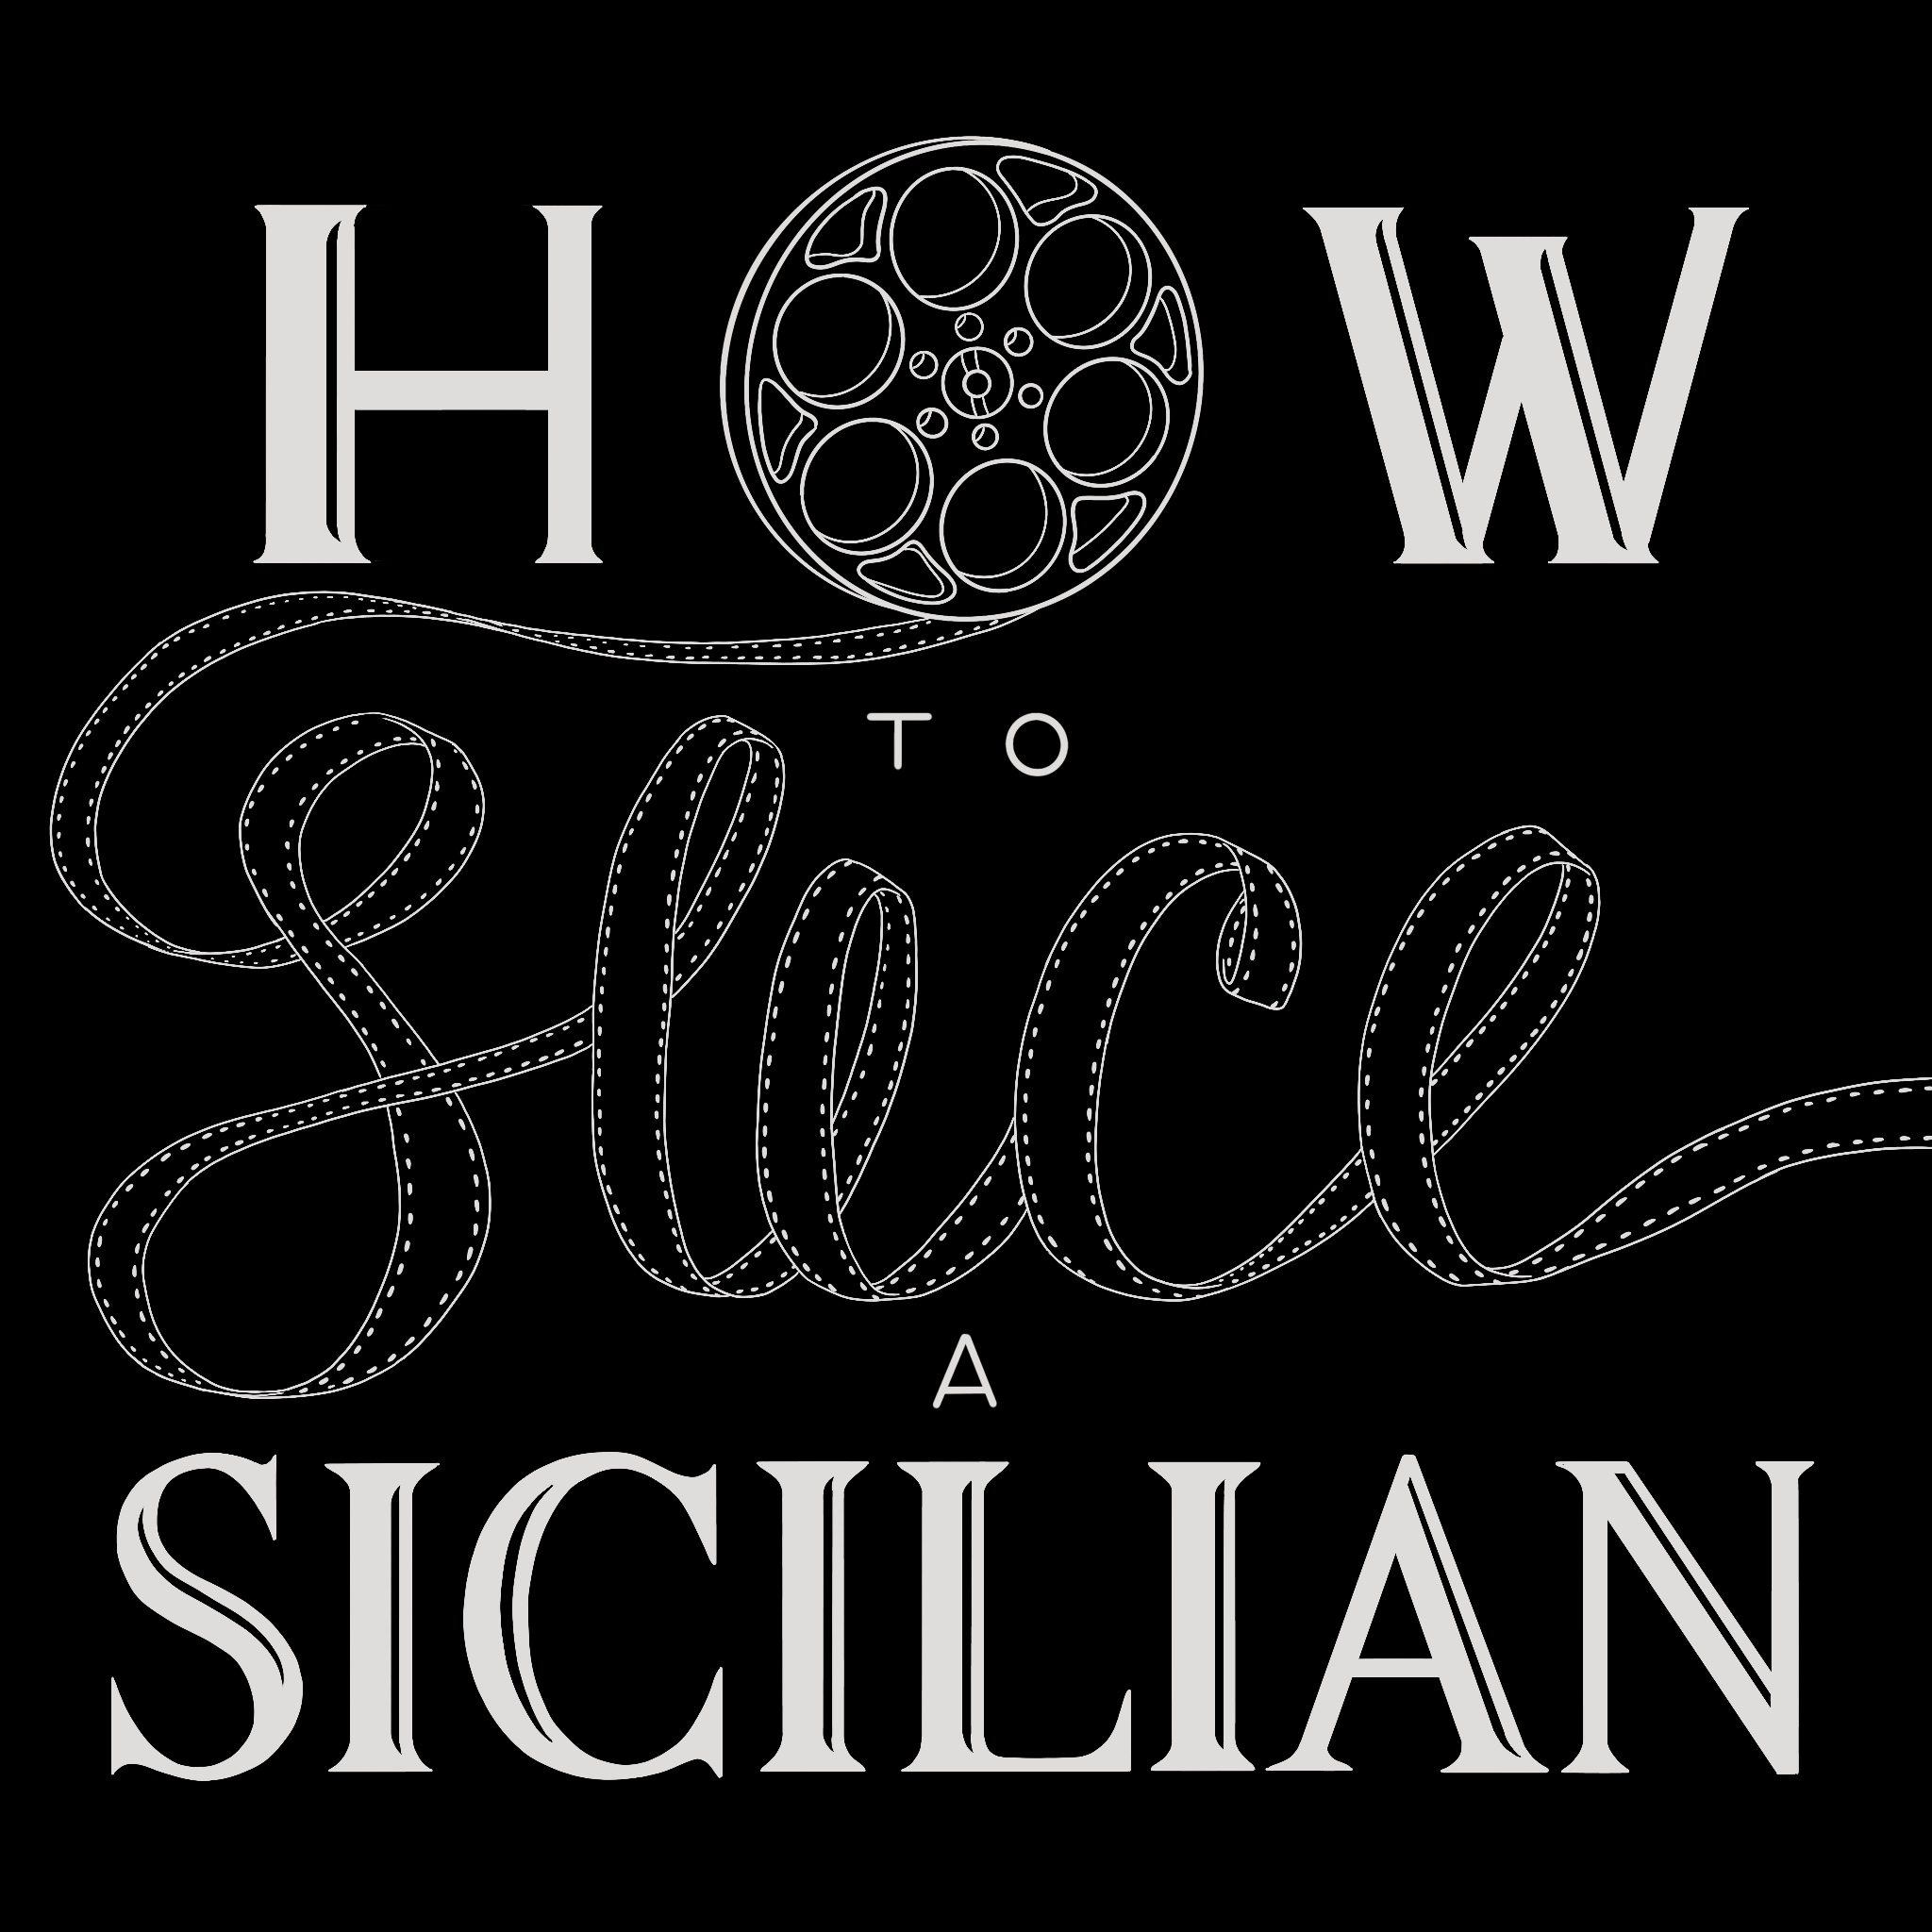 How To Slice A Sicilian Image